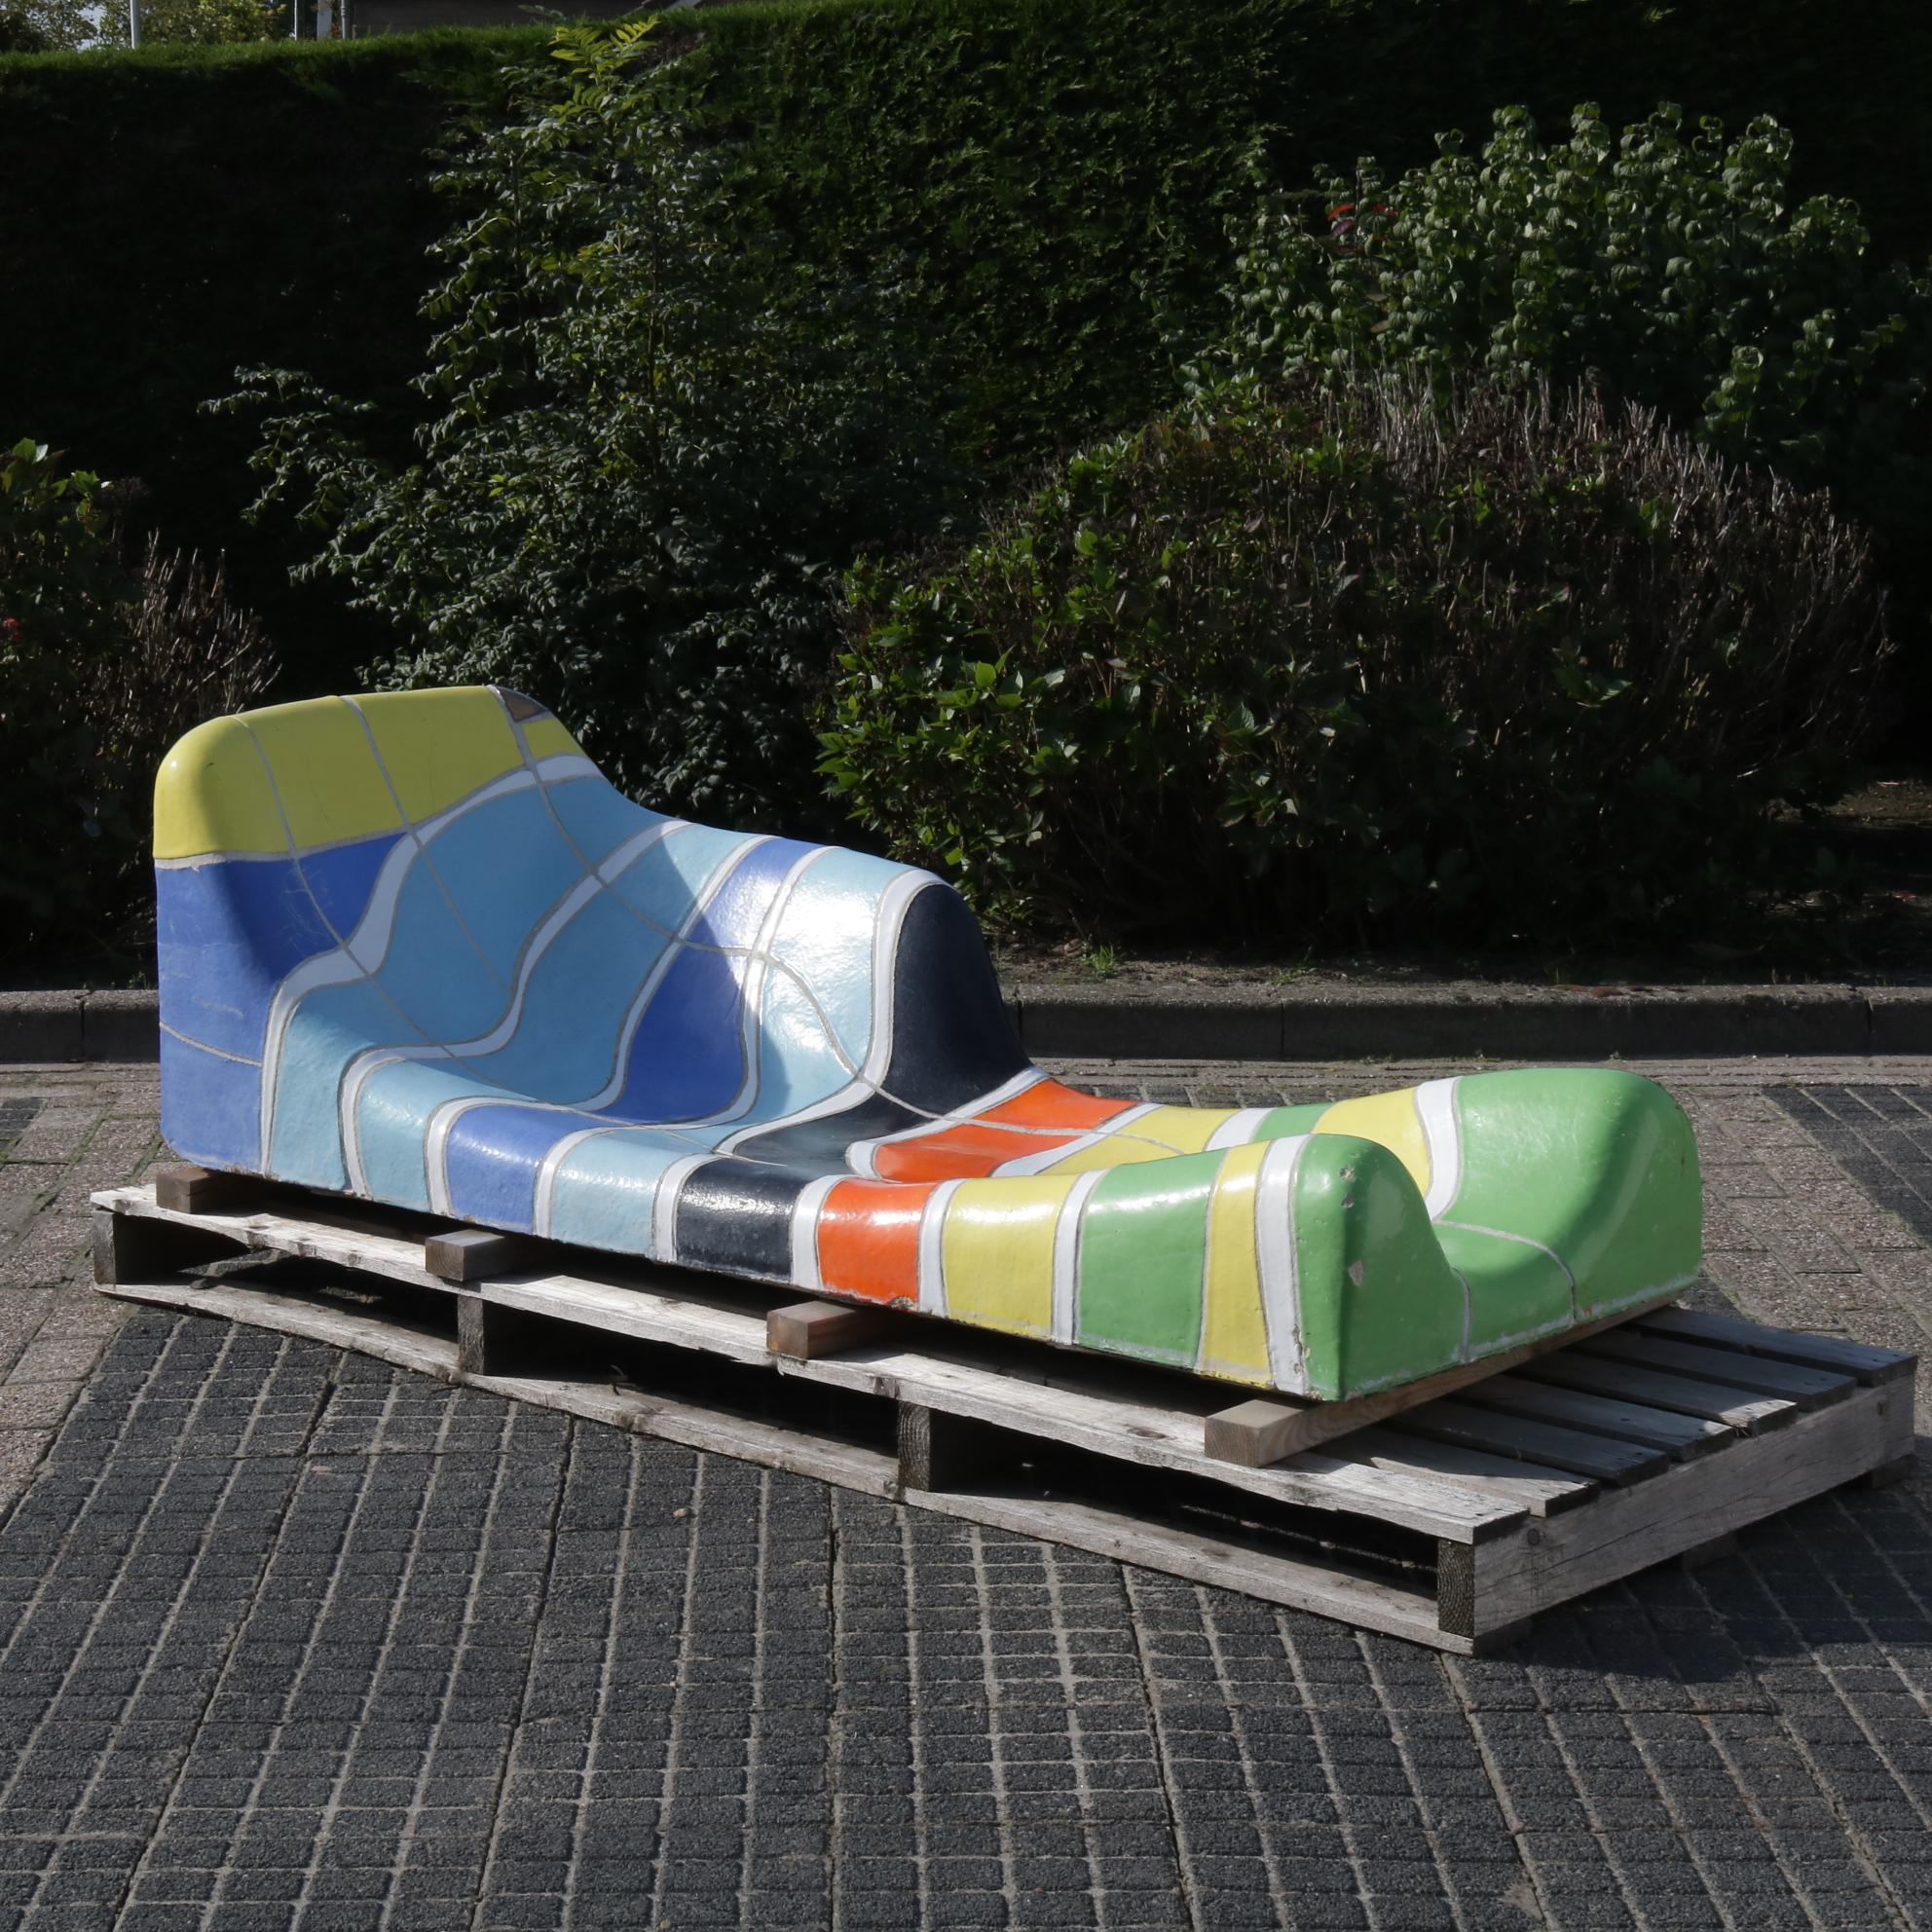 Mid-Century Modern Jan Snoeck Ceramics Daybed or Sculpture from the Ms Volendam, Netherlands 1991